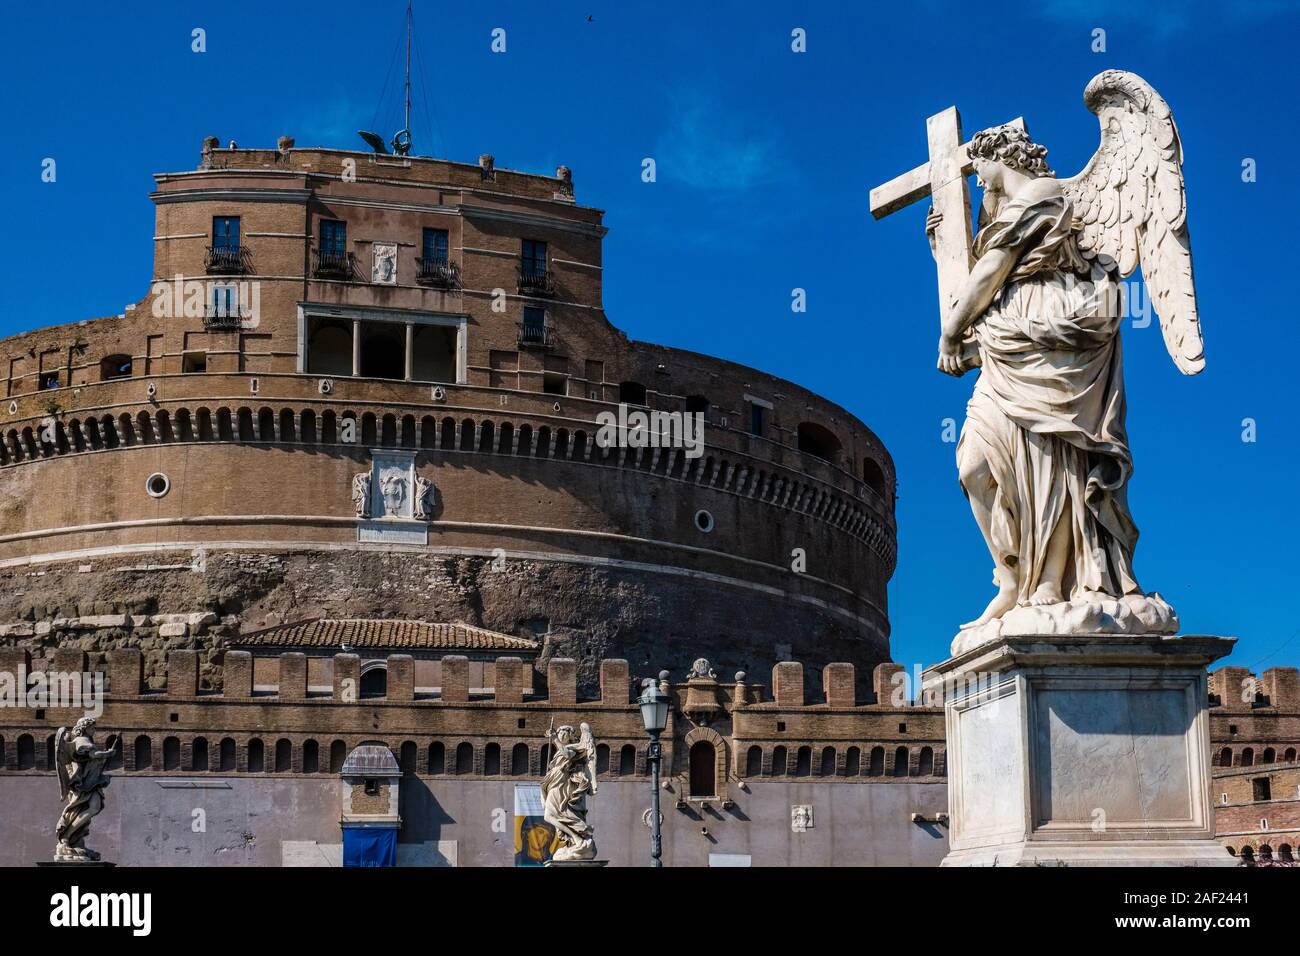 A statue of an angel, carrying a cross, on the bridge Ponte Sant'Angelo, the Castle of the Holy Angel, Castel Sant'Angelo in the distance Stock Photo